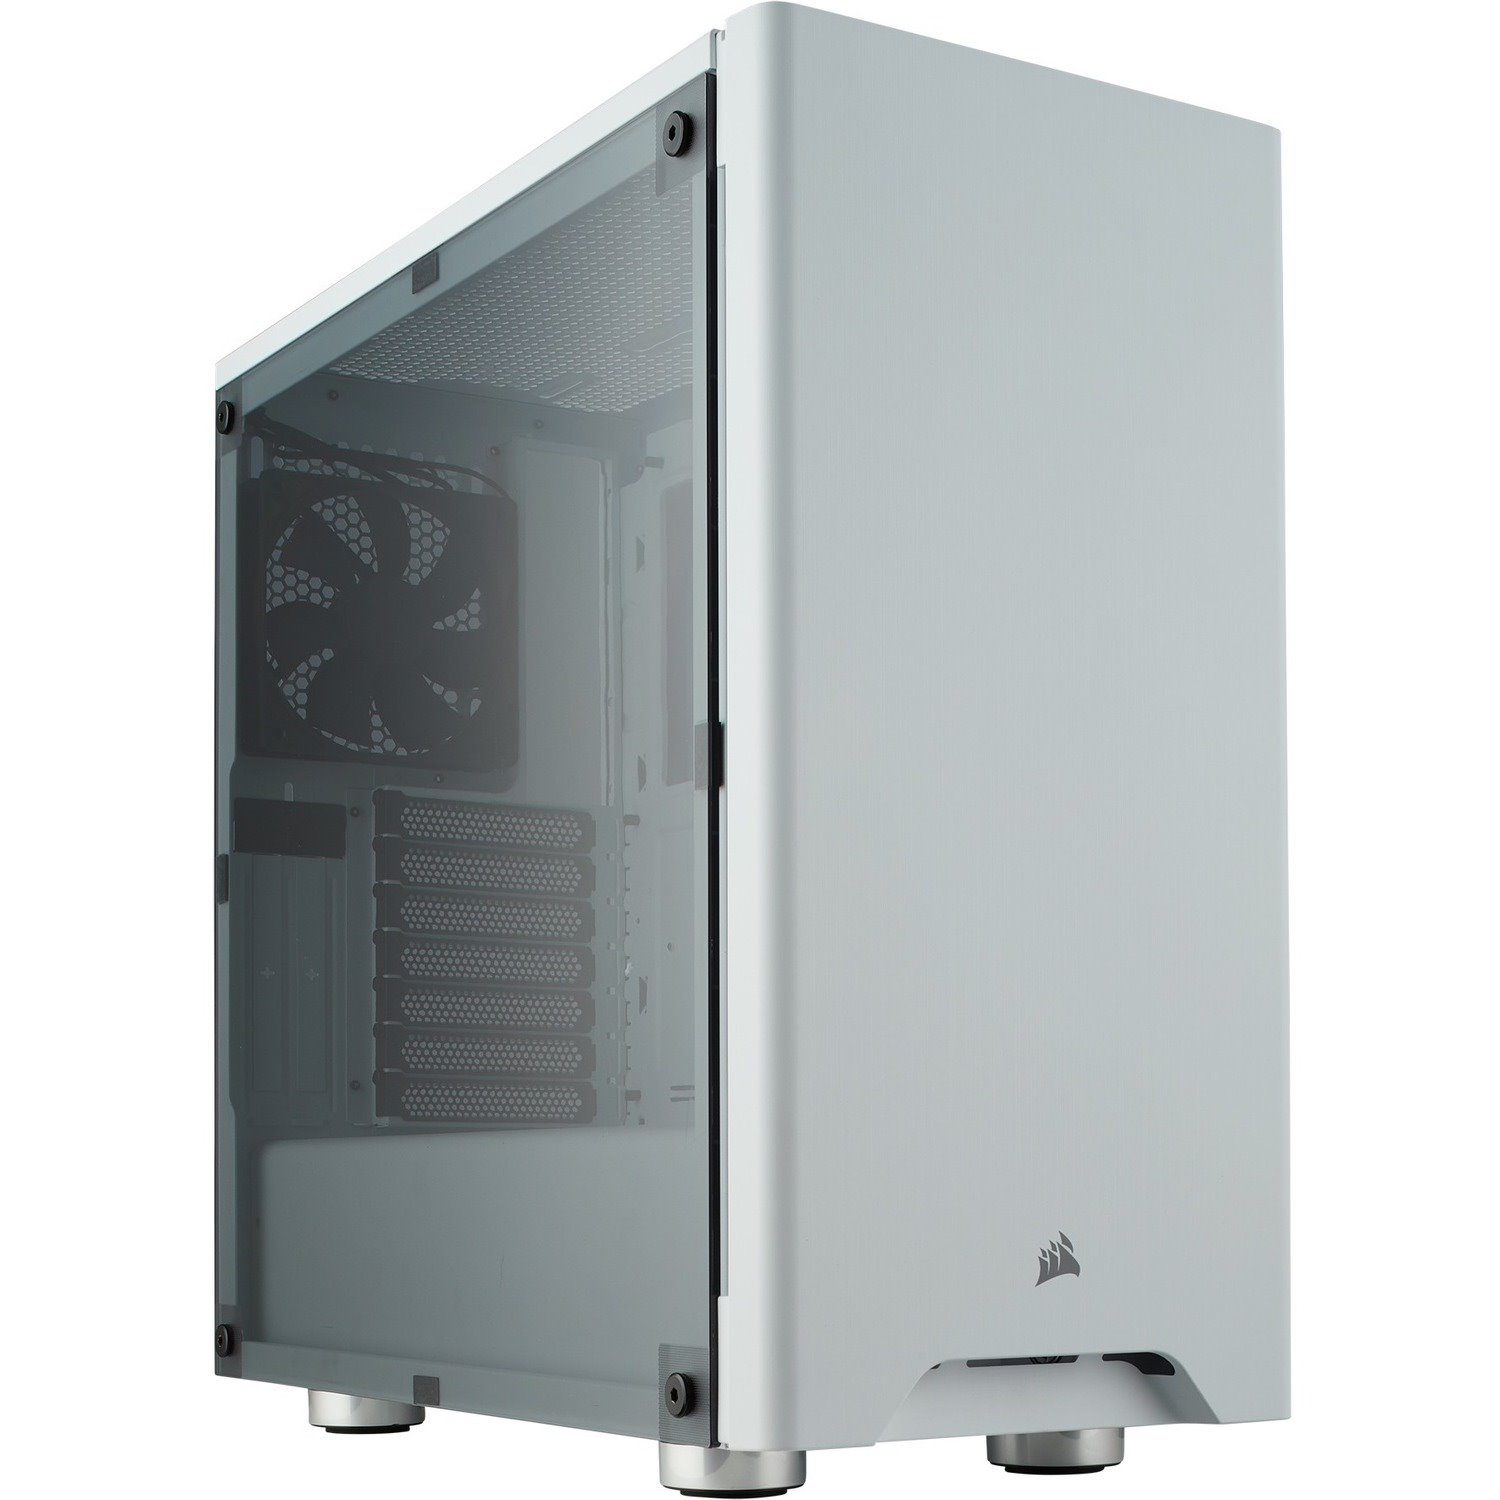 Corsair Carbide 275R Computer Case - ATX, Micro ATX, Mini ITX Motherboard Supported - Mid-tower - Steel, Plastic, Acrylic - White